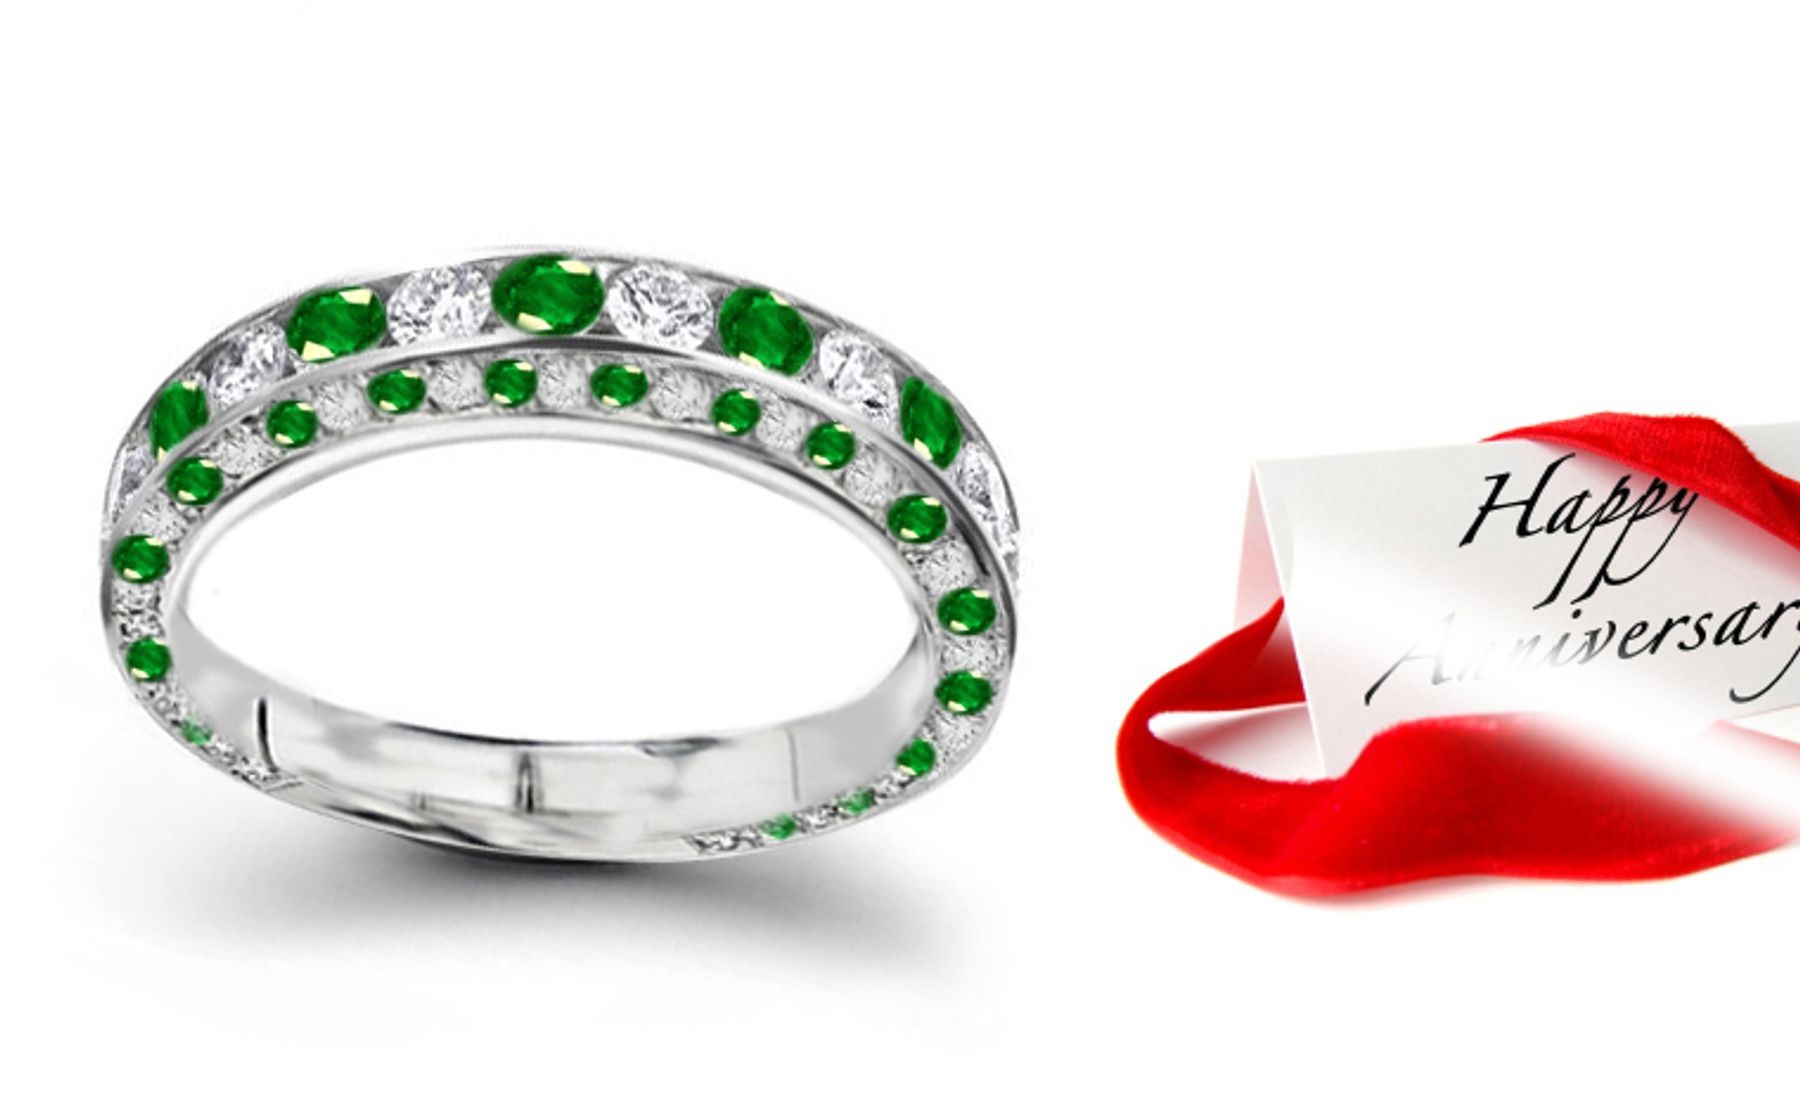 "Gem of Gems": Micropave Diamond & Emerald Eternity Ring To Cherish with Green Darker in Proportion